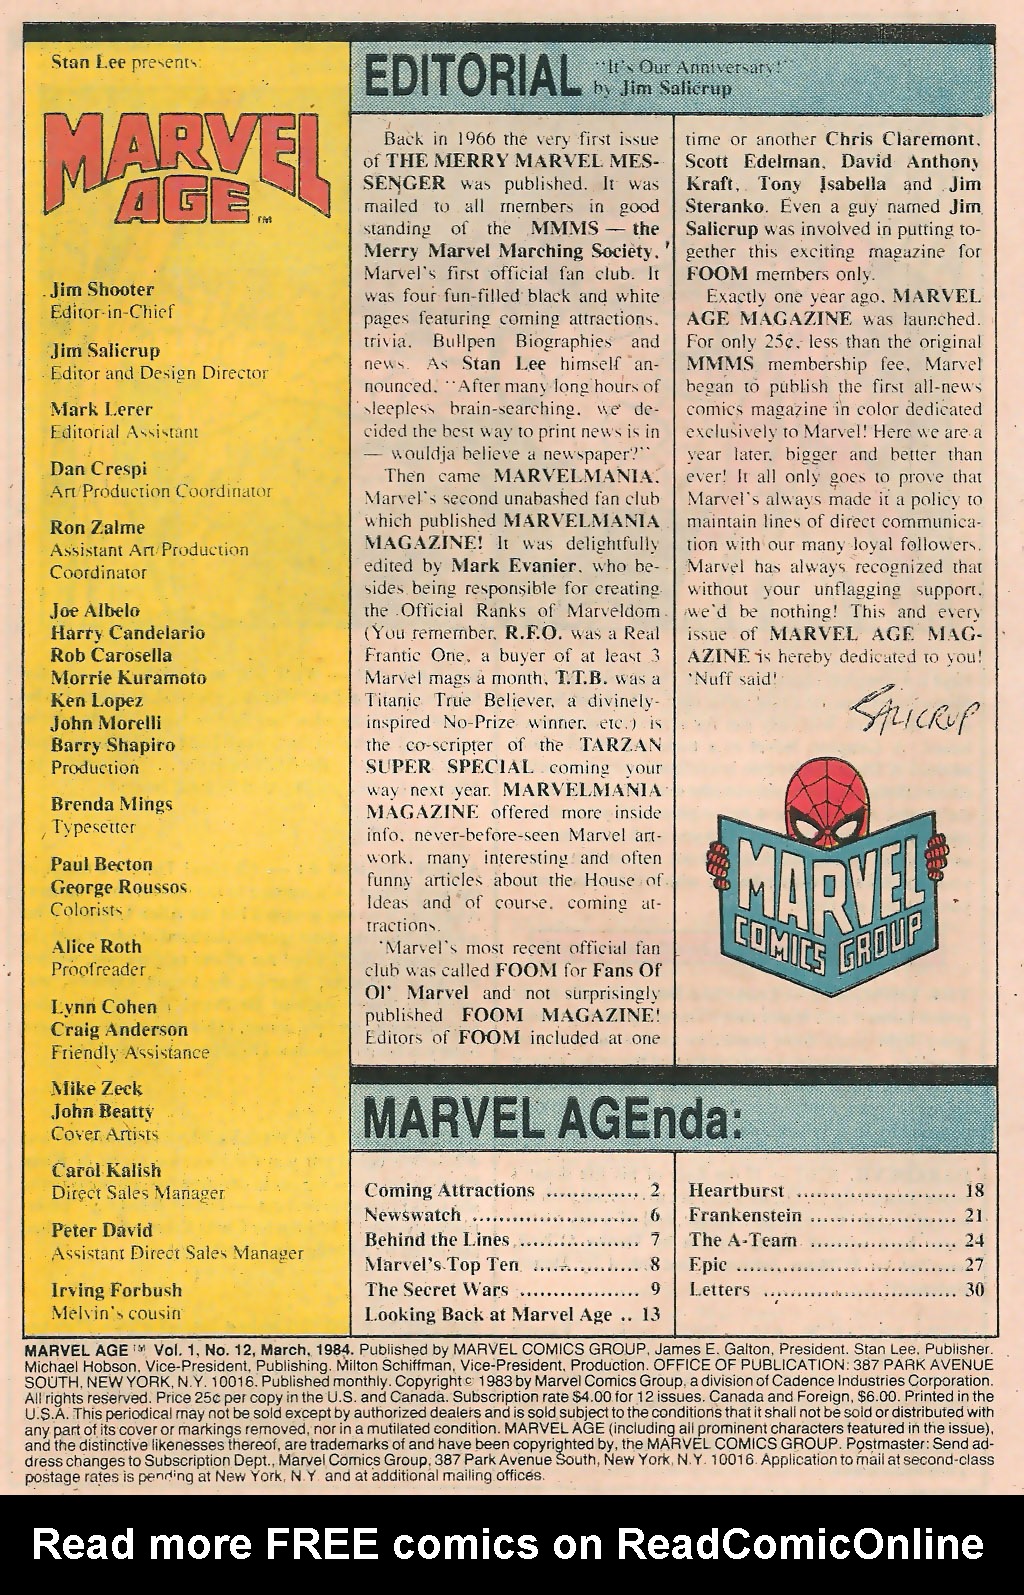 Read online Marvel Age comic -  Issue #12 - 3